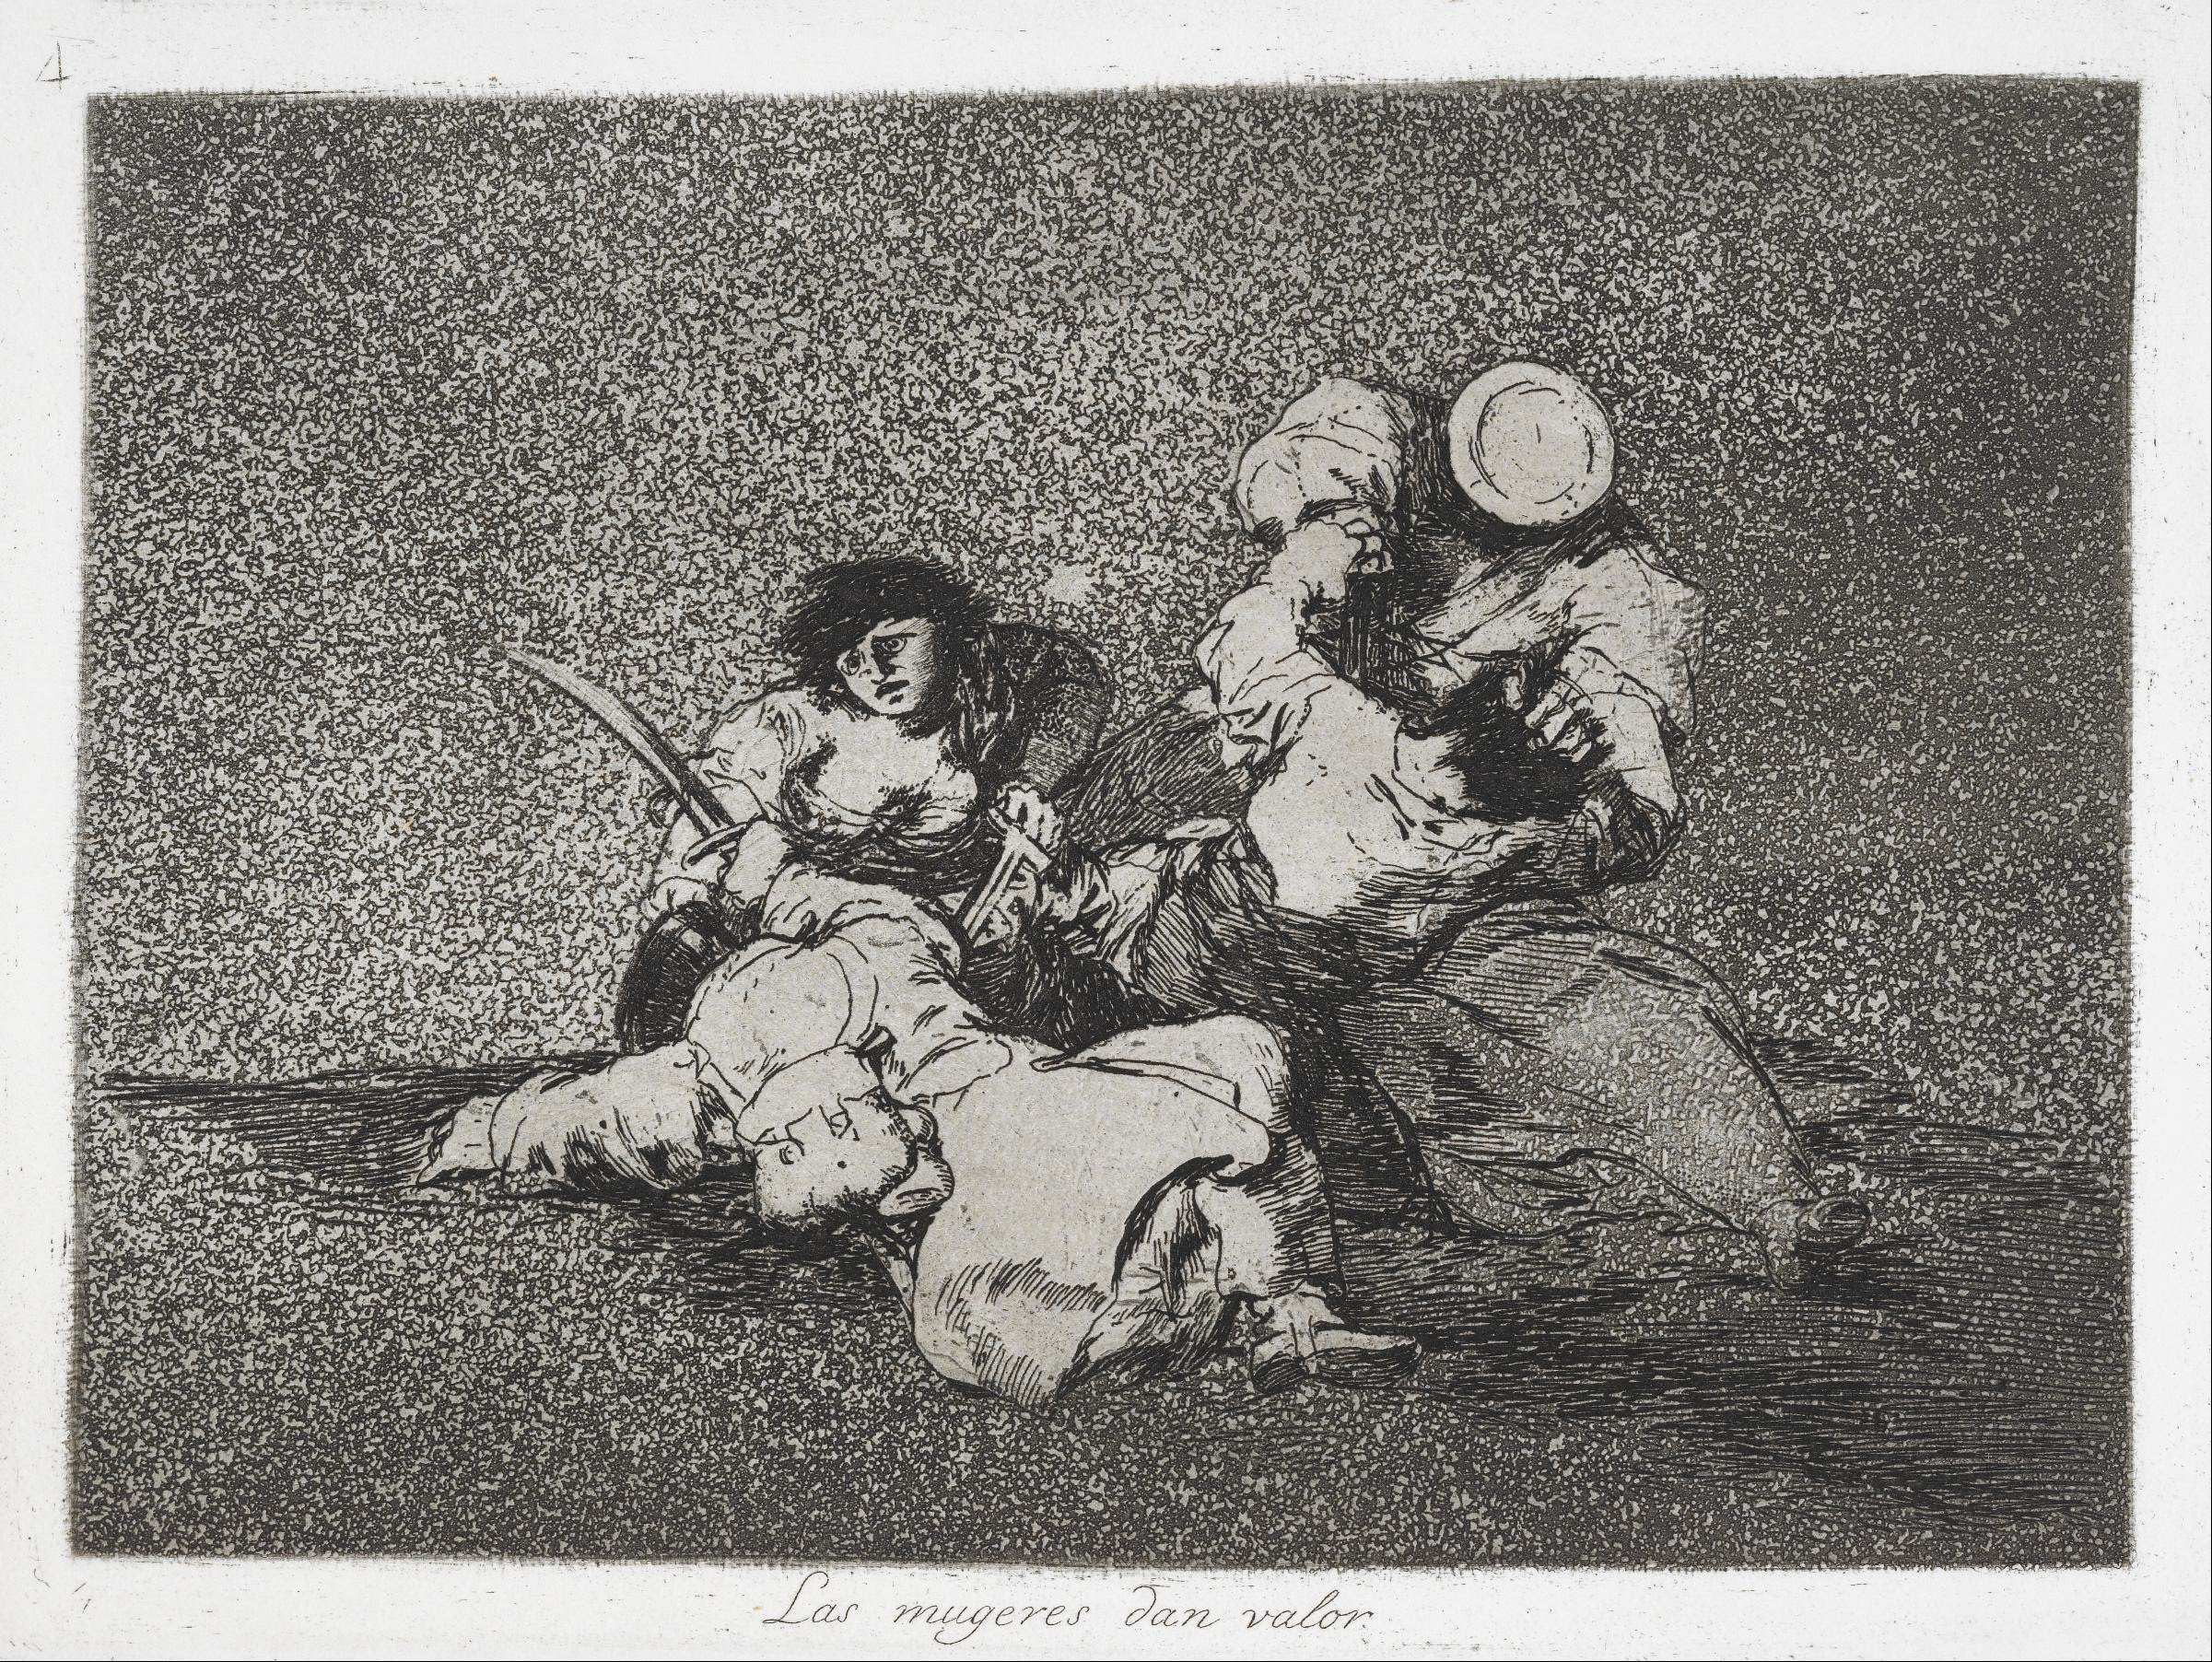 Francisco Goya, The Disasters of War, 1810-1820, plate 4: Las mujeres dan valor (The women are courageous). A struggle between civilians and soldiers